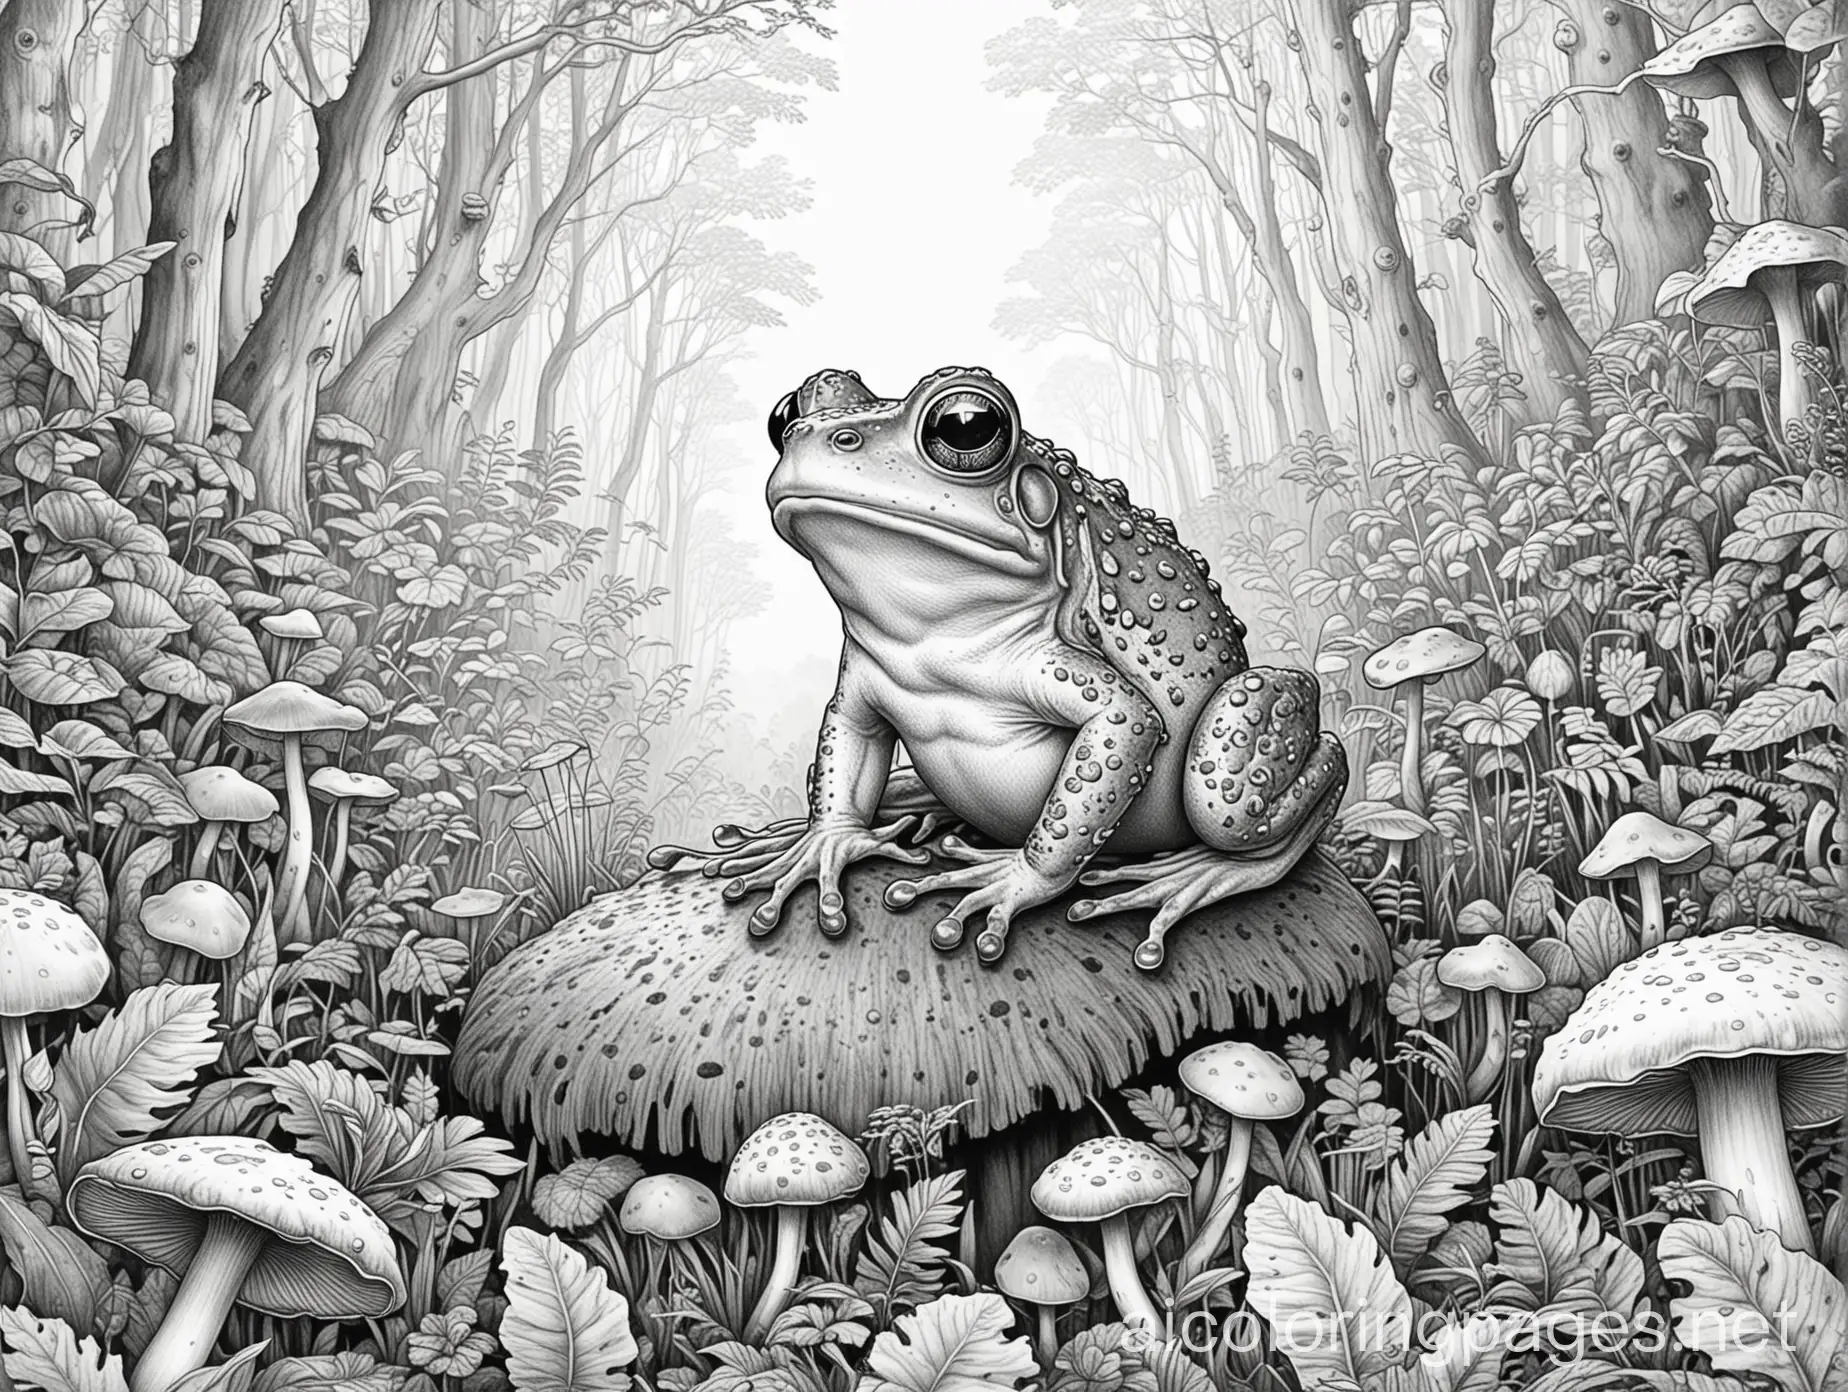 Mythographic single frog in mushroom forest 
, Coloring Page, black and white, line art, white background, Simplicity, Ample White Space. The background of the coloring page is plain white to make it easy for young children to color within the lines. The outlines of all the subjects are easy to distinguish, making it simple for kids to color without too much difficulty